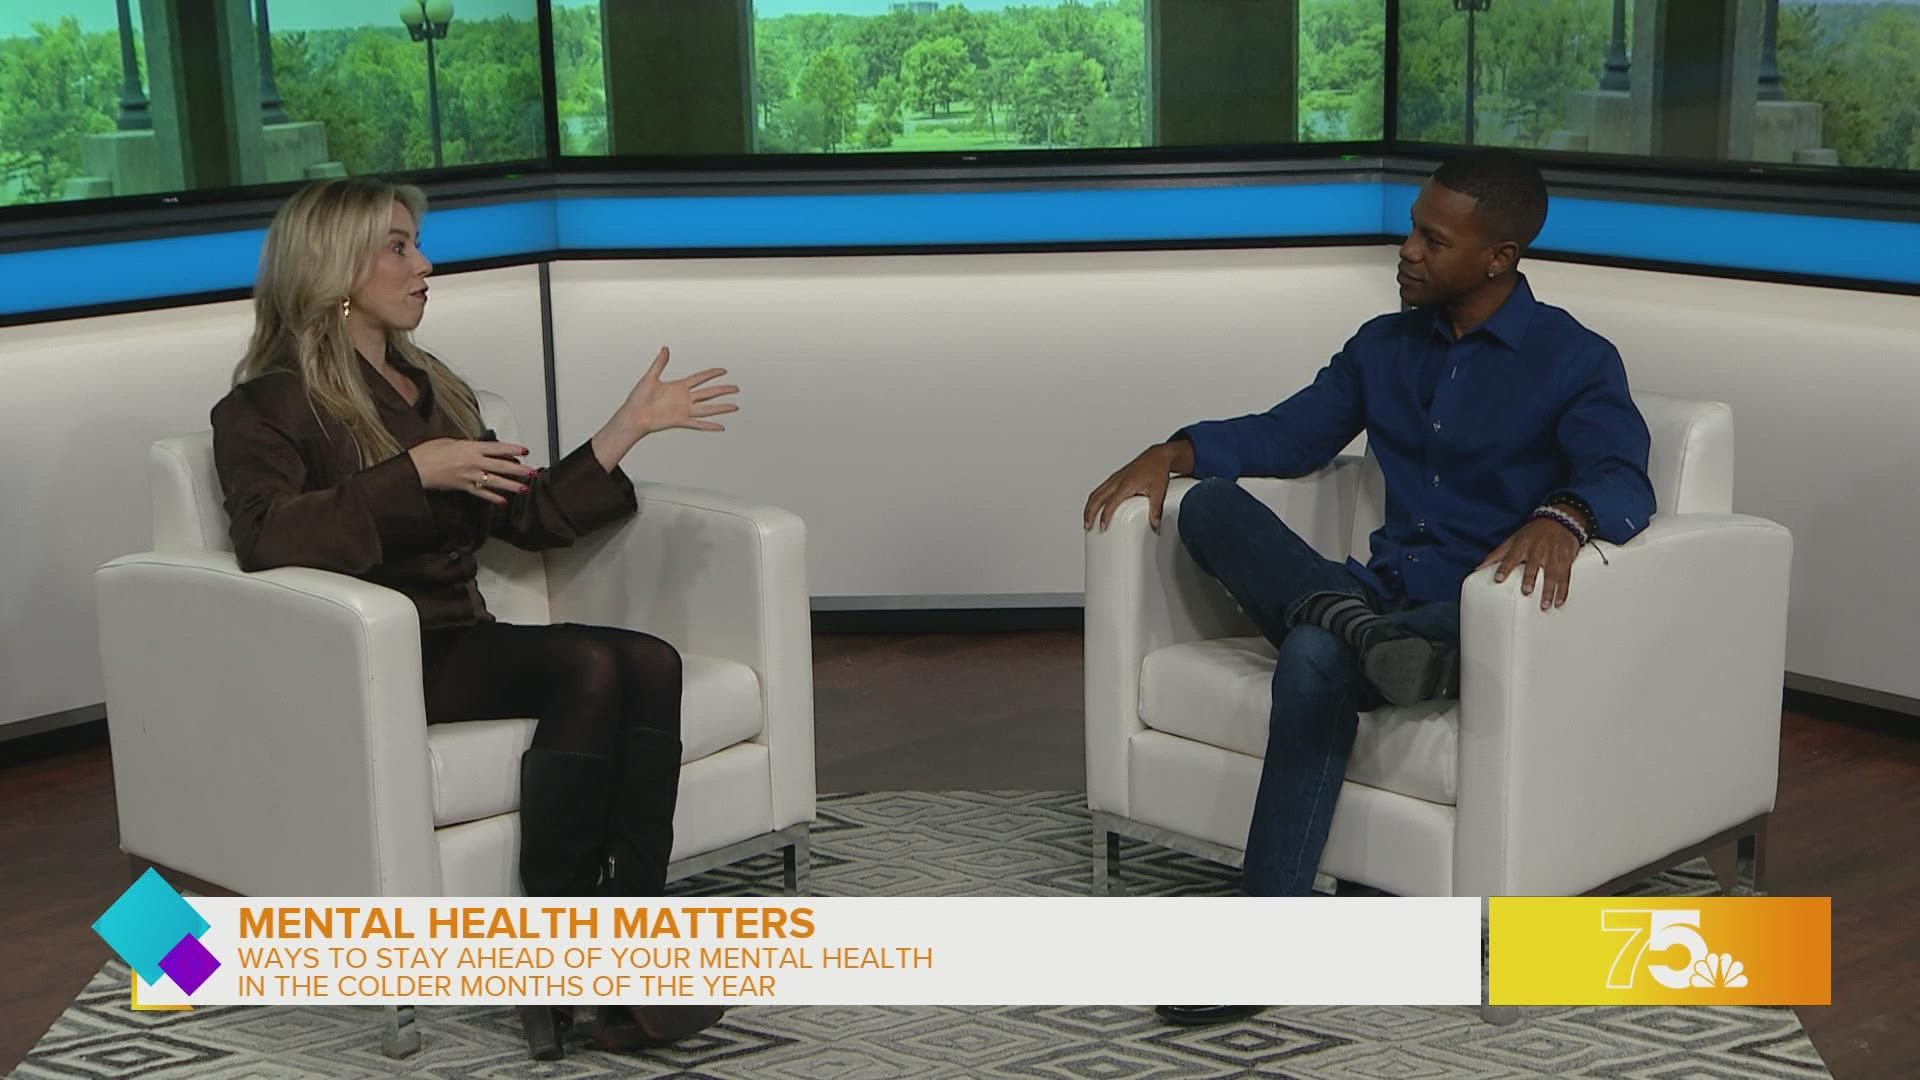 Psychotherapist, Fred Williams, joined Mary in the studio to share how to stay ahead of your mental health this Holiday season.